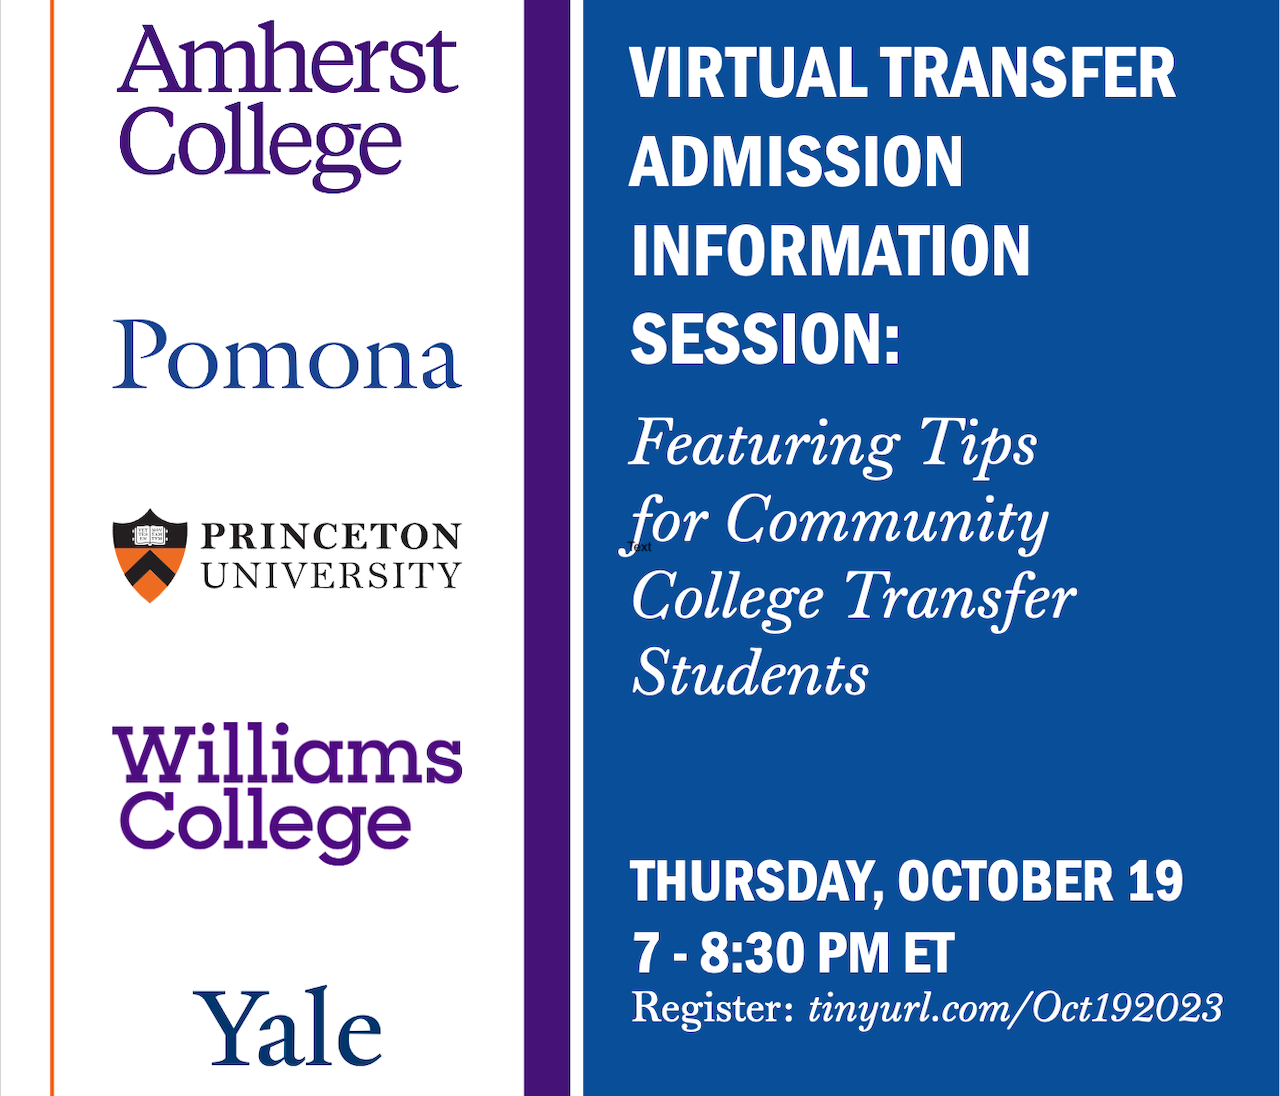 Flyer for Virtual Transfer Admission Information Session